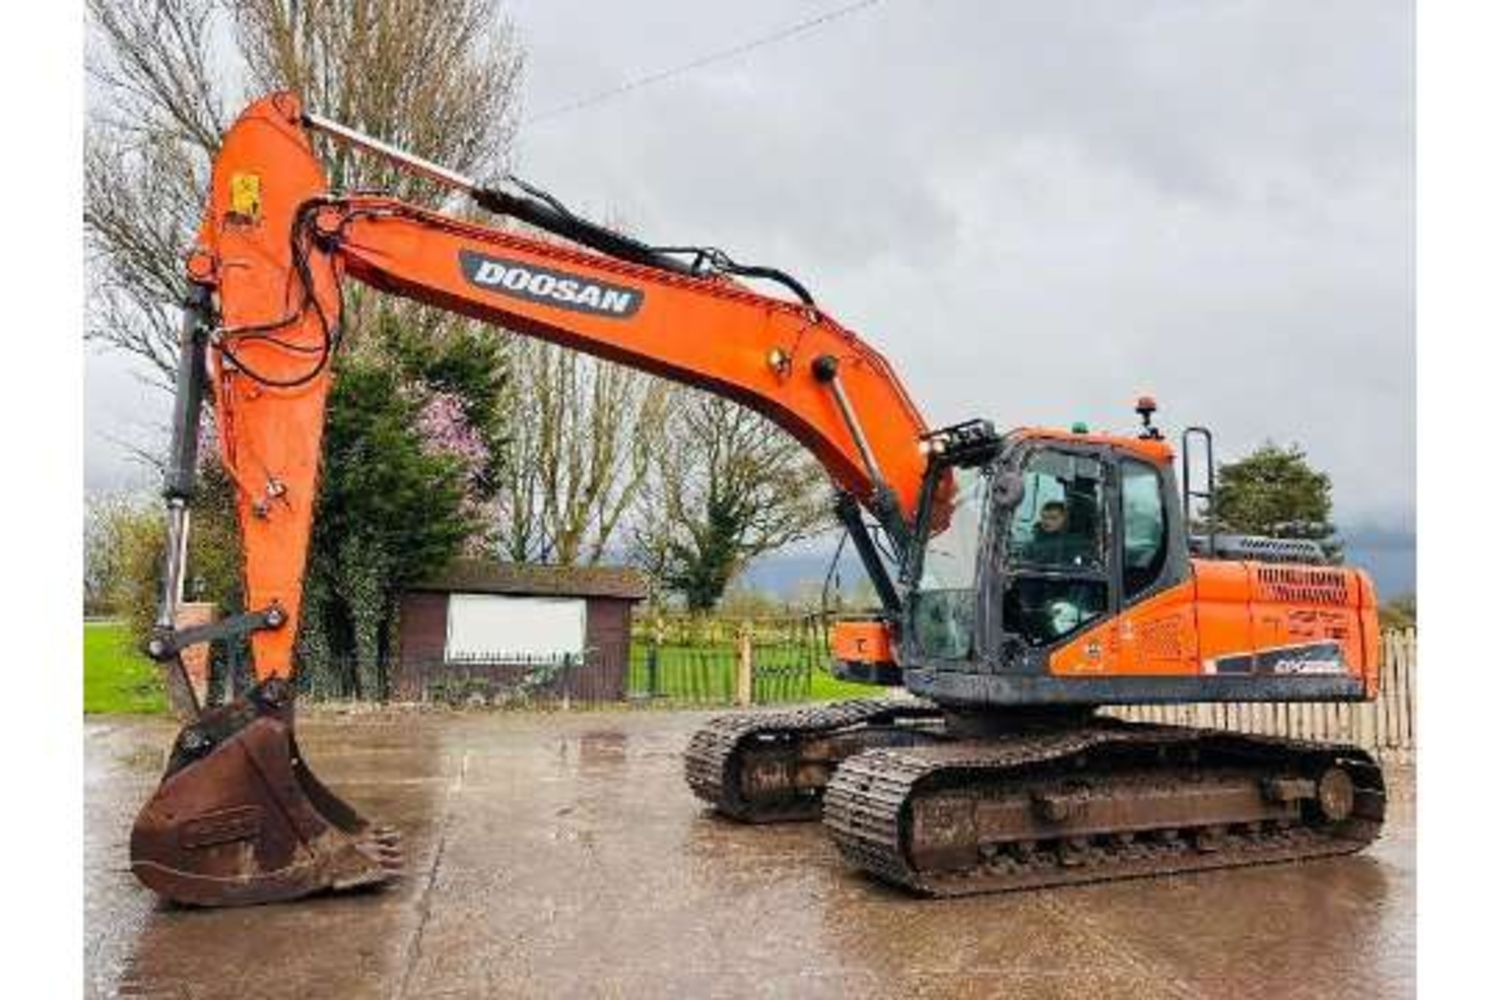 HAND PICKED SELECTION OF PLANT, Includes Excavators, Dumpers, Generators, Access Lifts, Rollers and General Plant ends from 5.30pm Sunday 24th